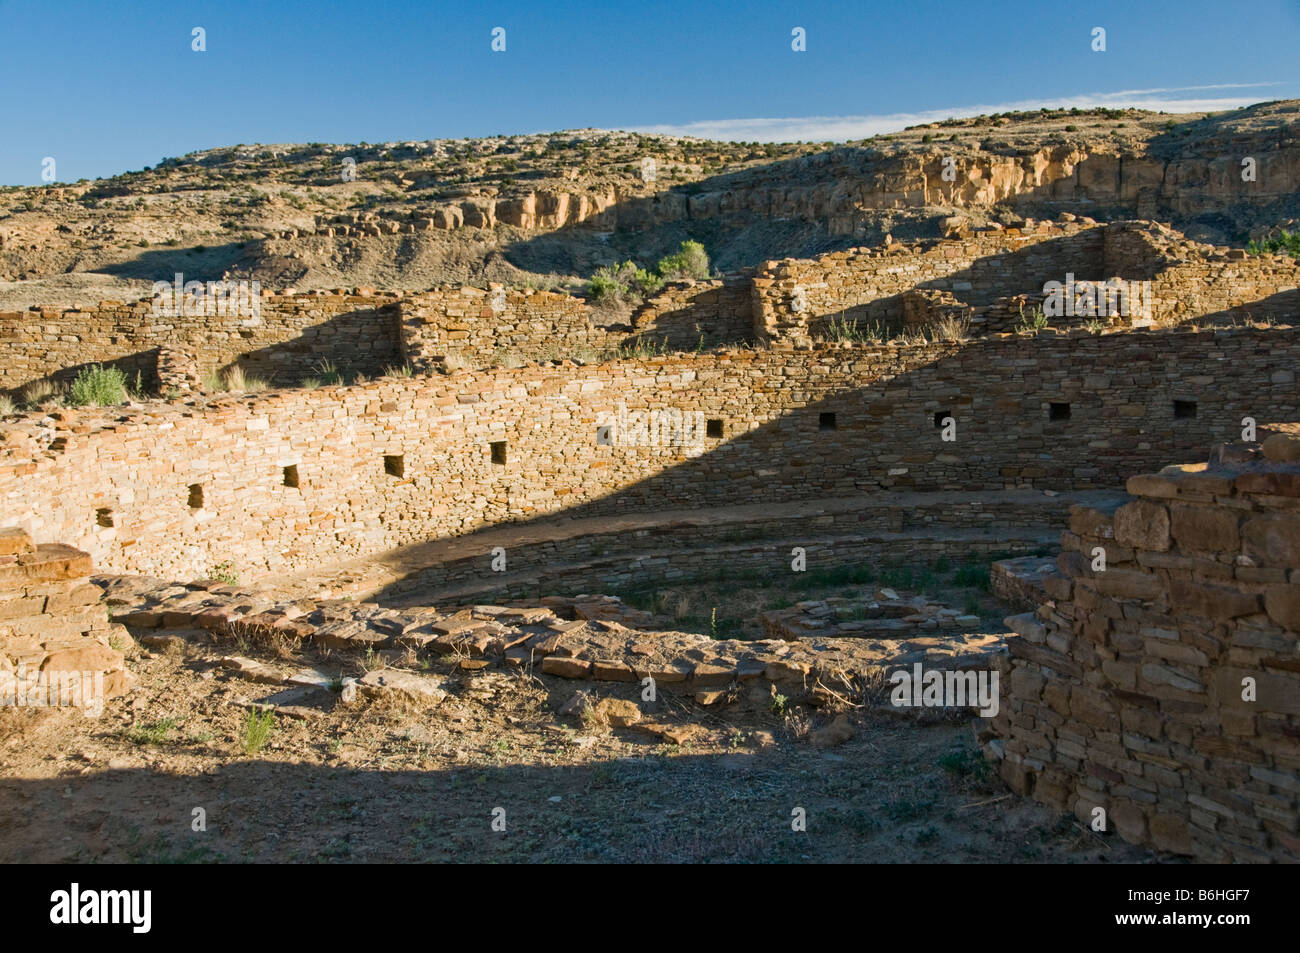 Chaco canyon Culture National Historical Park New Mexico Stock Photo